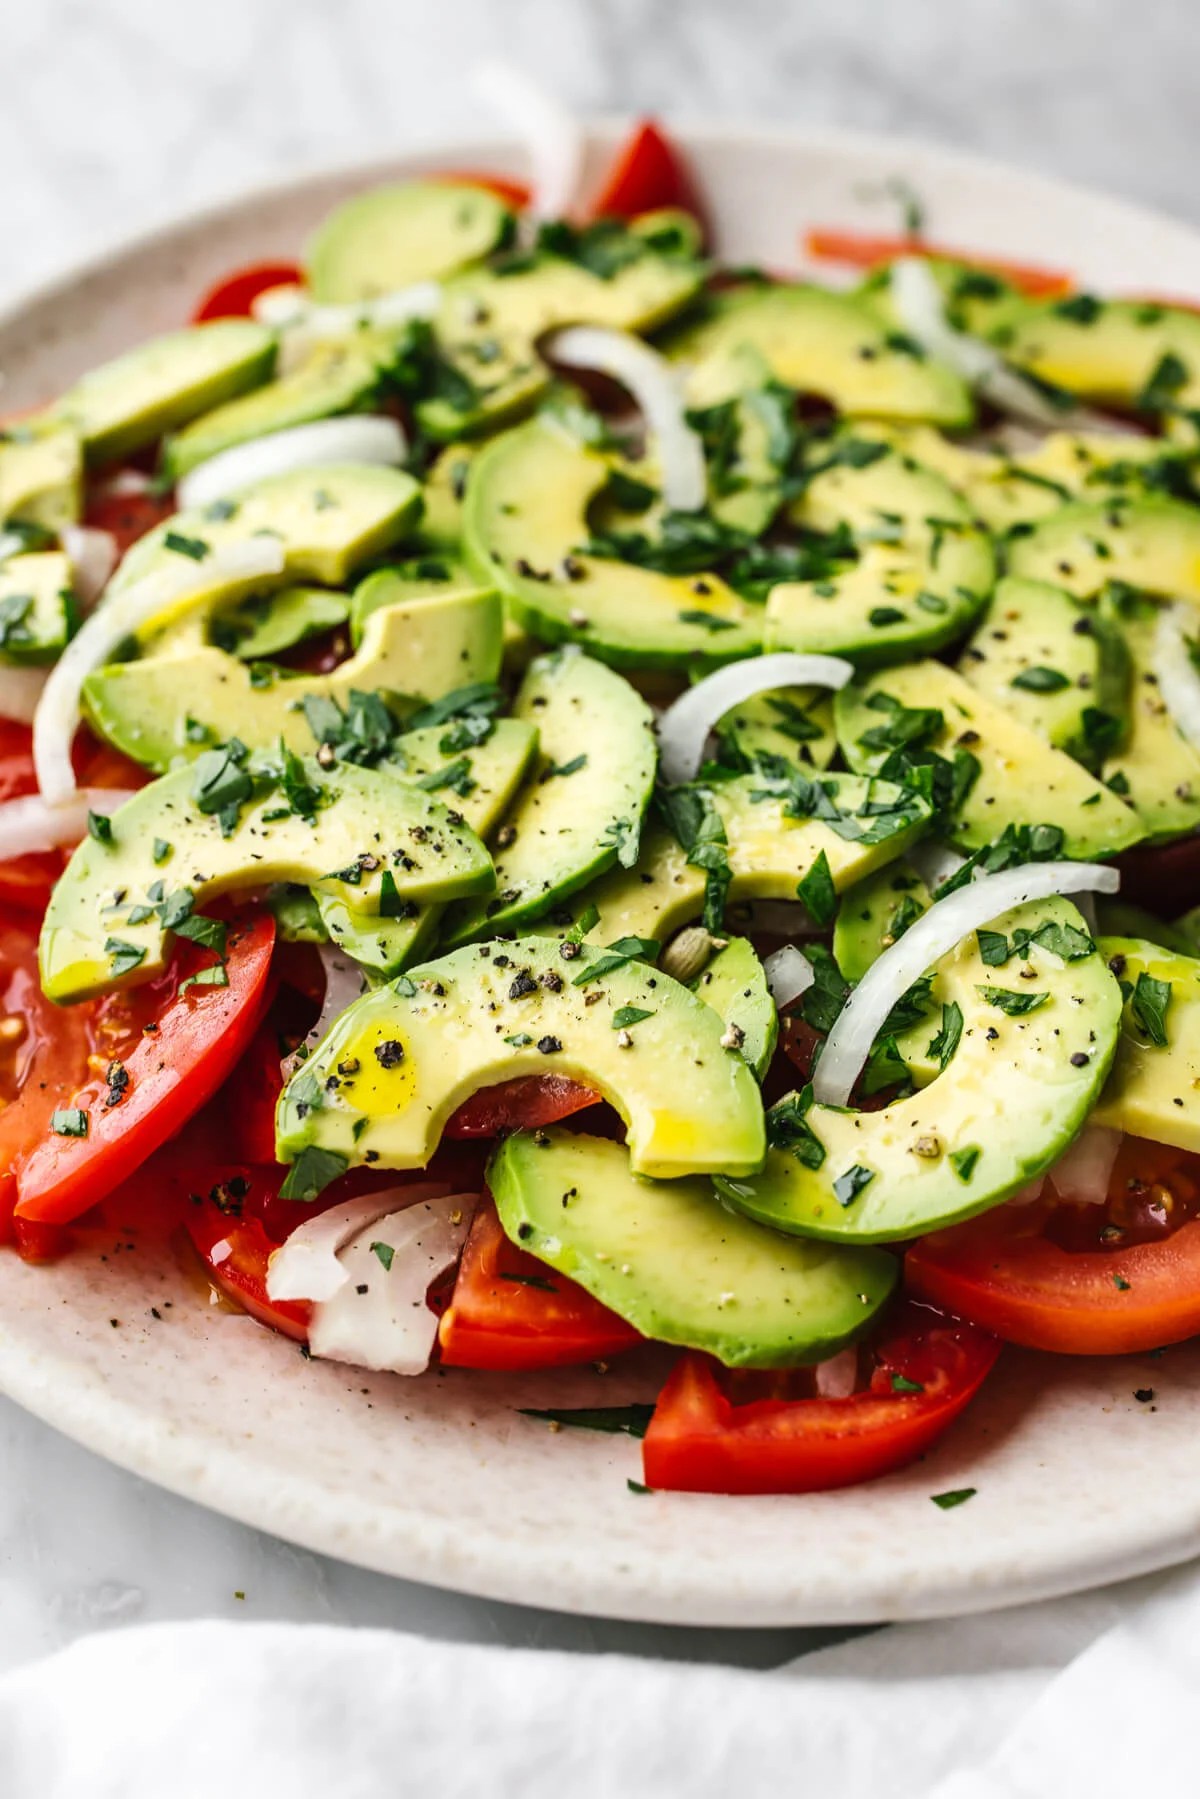 A large white plate of tomato, onion, and avocado salad